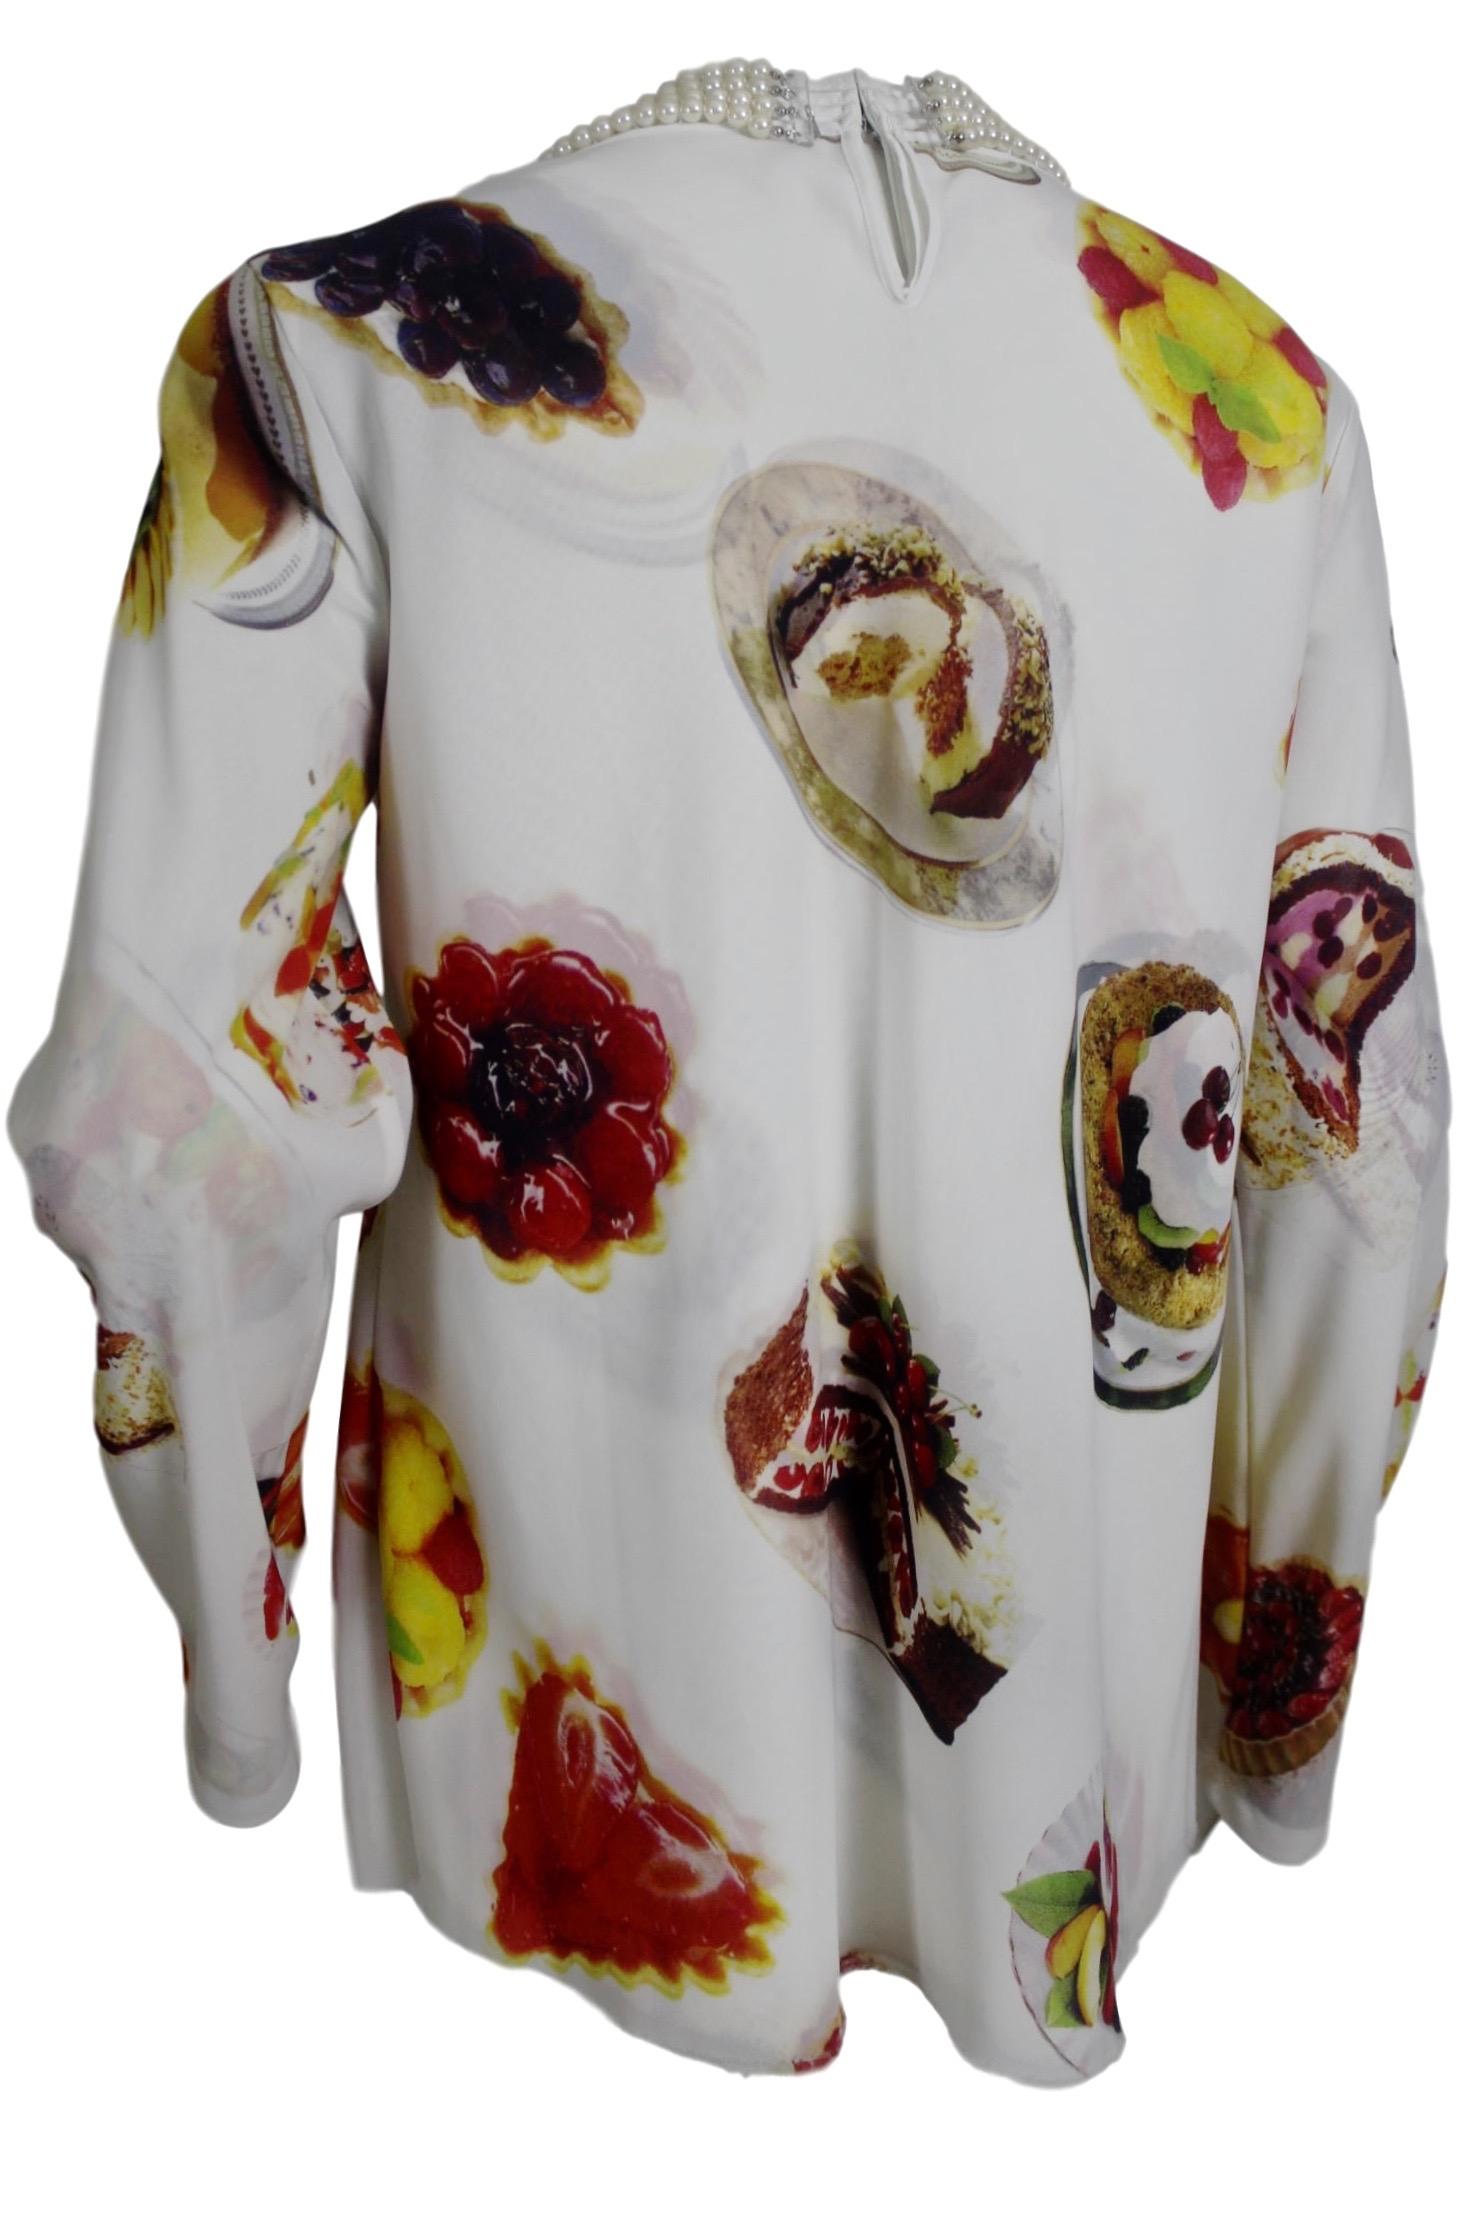 Comme des Garcons Junya Watanabe AD2000 Multi Layered Pearl Collar Blouse  In Excellent Condition For Sale In Bath, GB